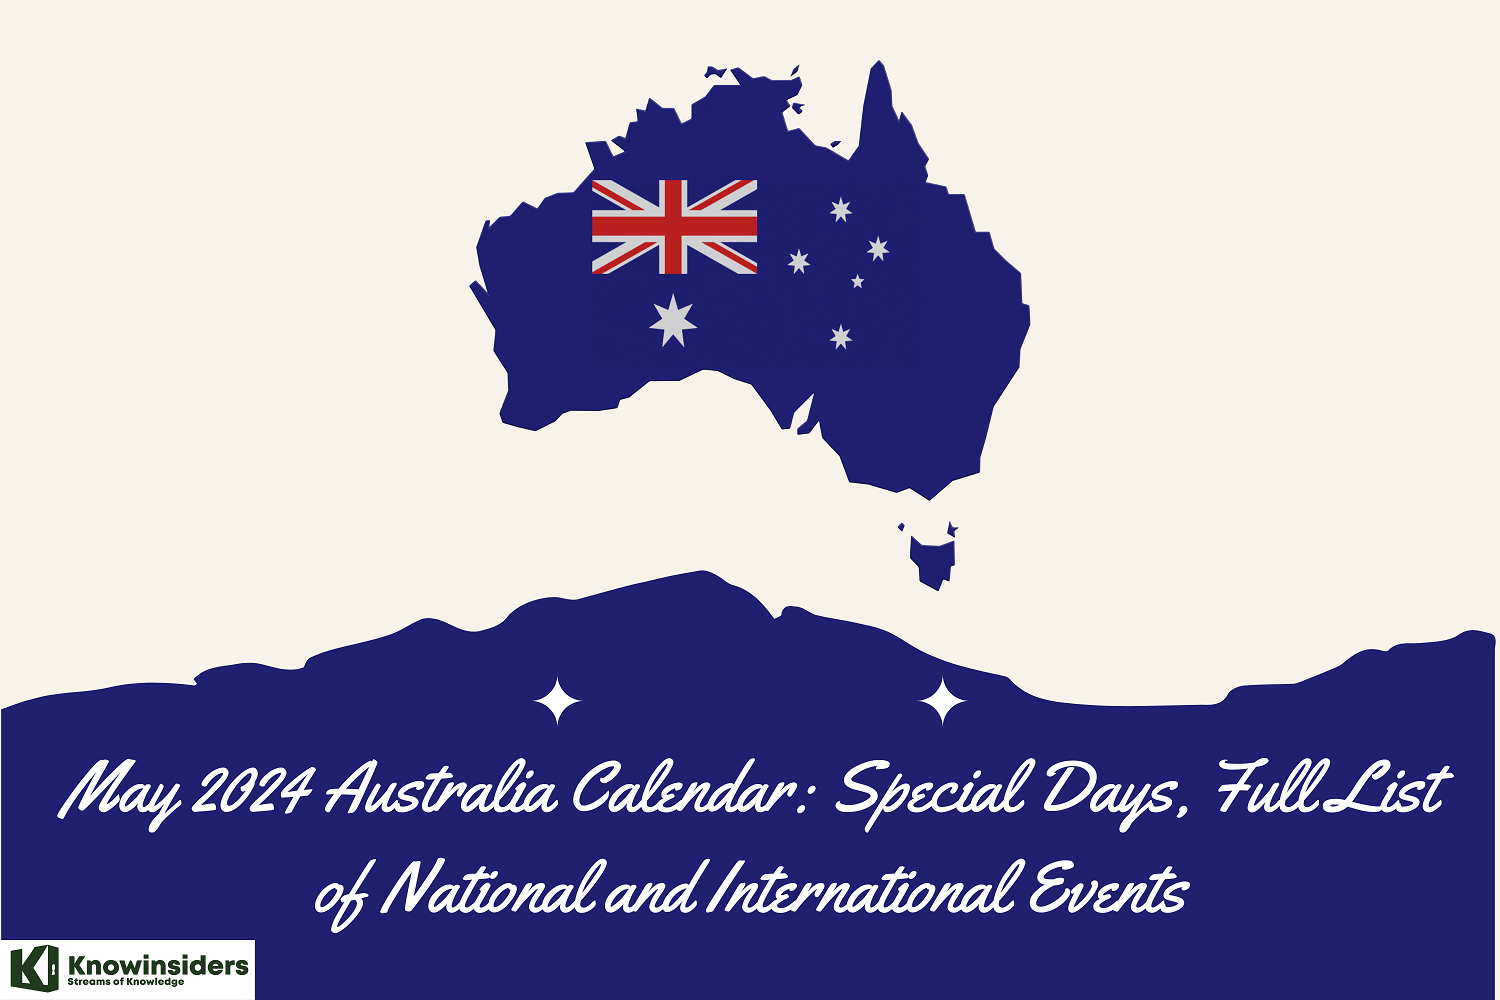 May 2024 Australia Calendar: Special Days, Full List of National and International Events